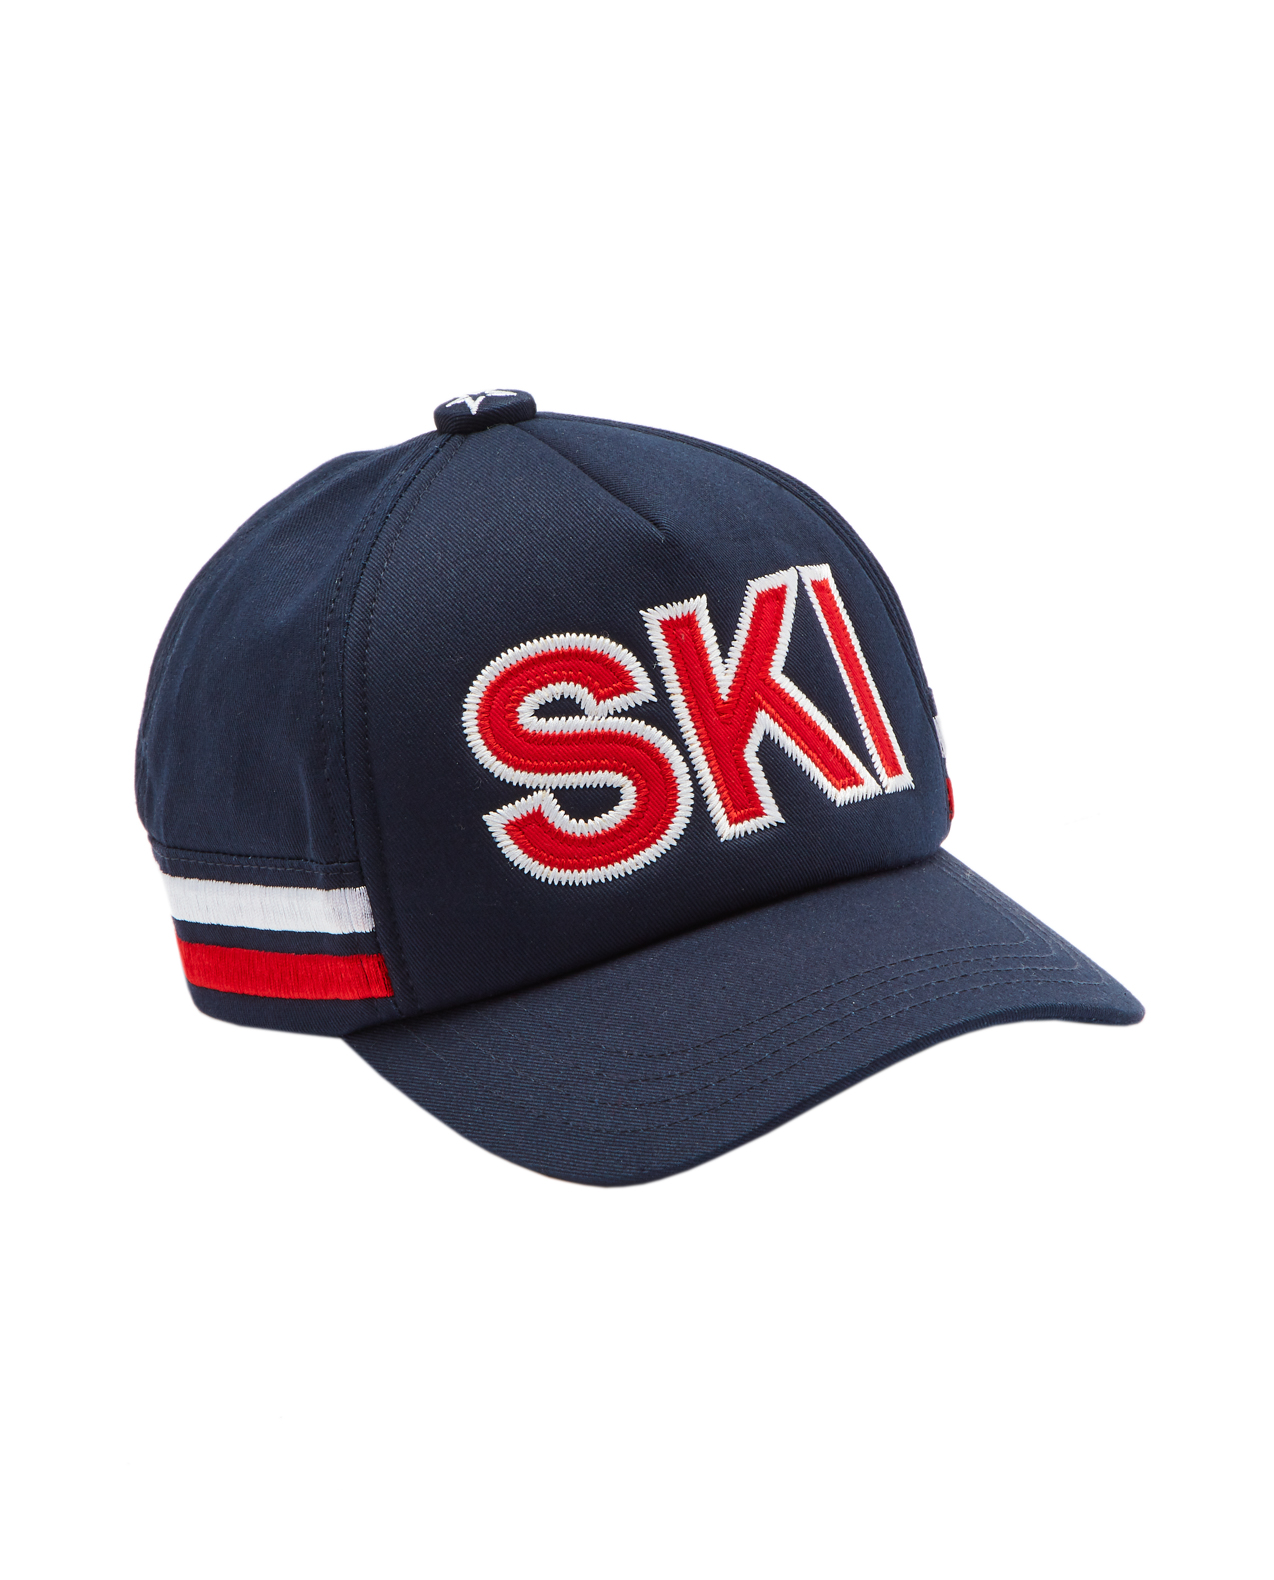 Perfect Moment Pm Cap Onesize In Navy-white-red